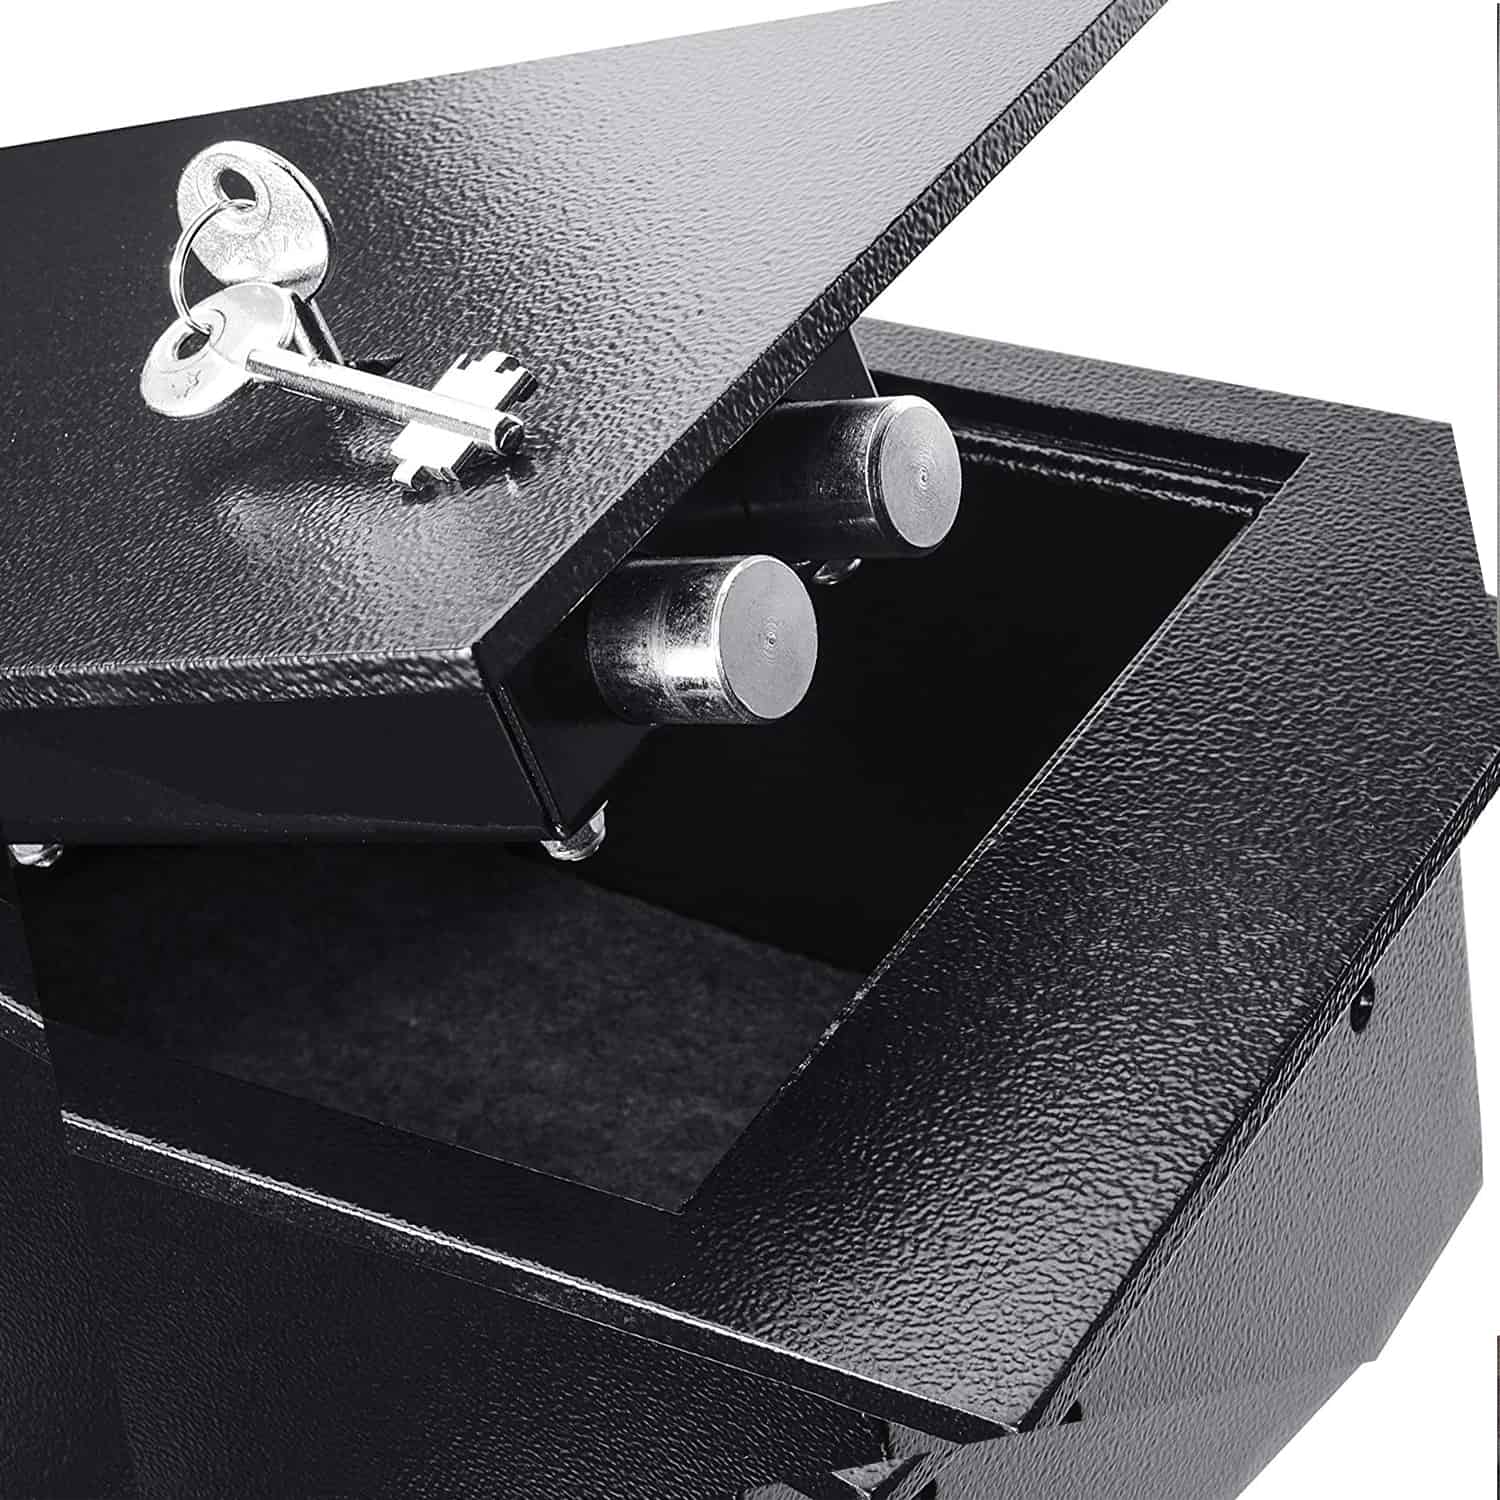 How To Open A Gun Safe Without A Key Defense Gears